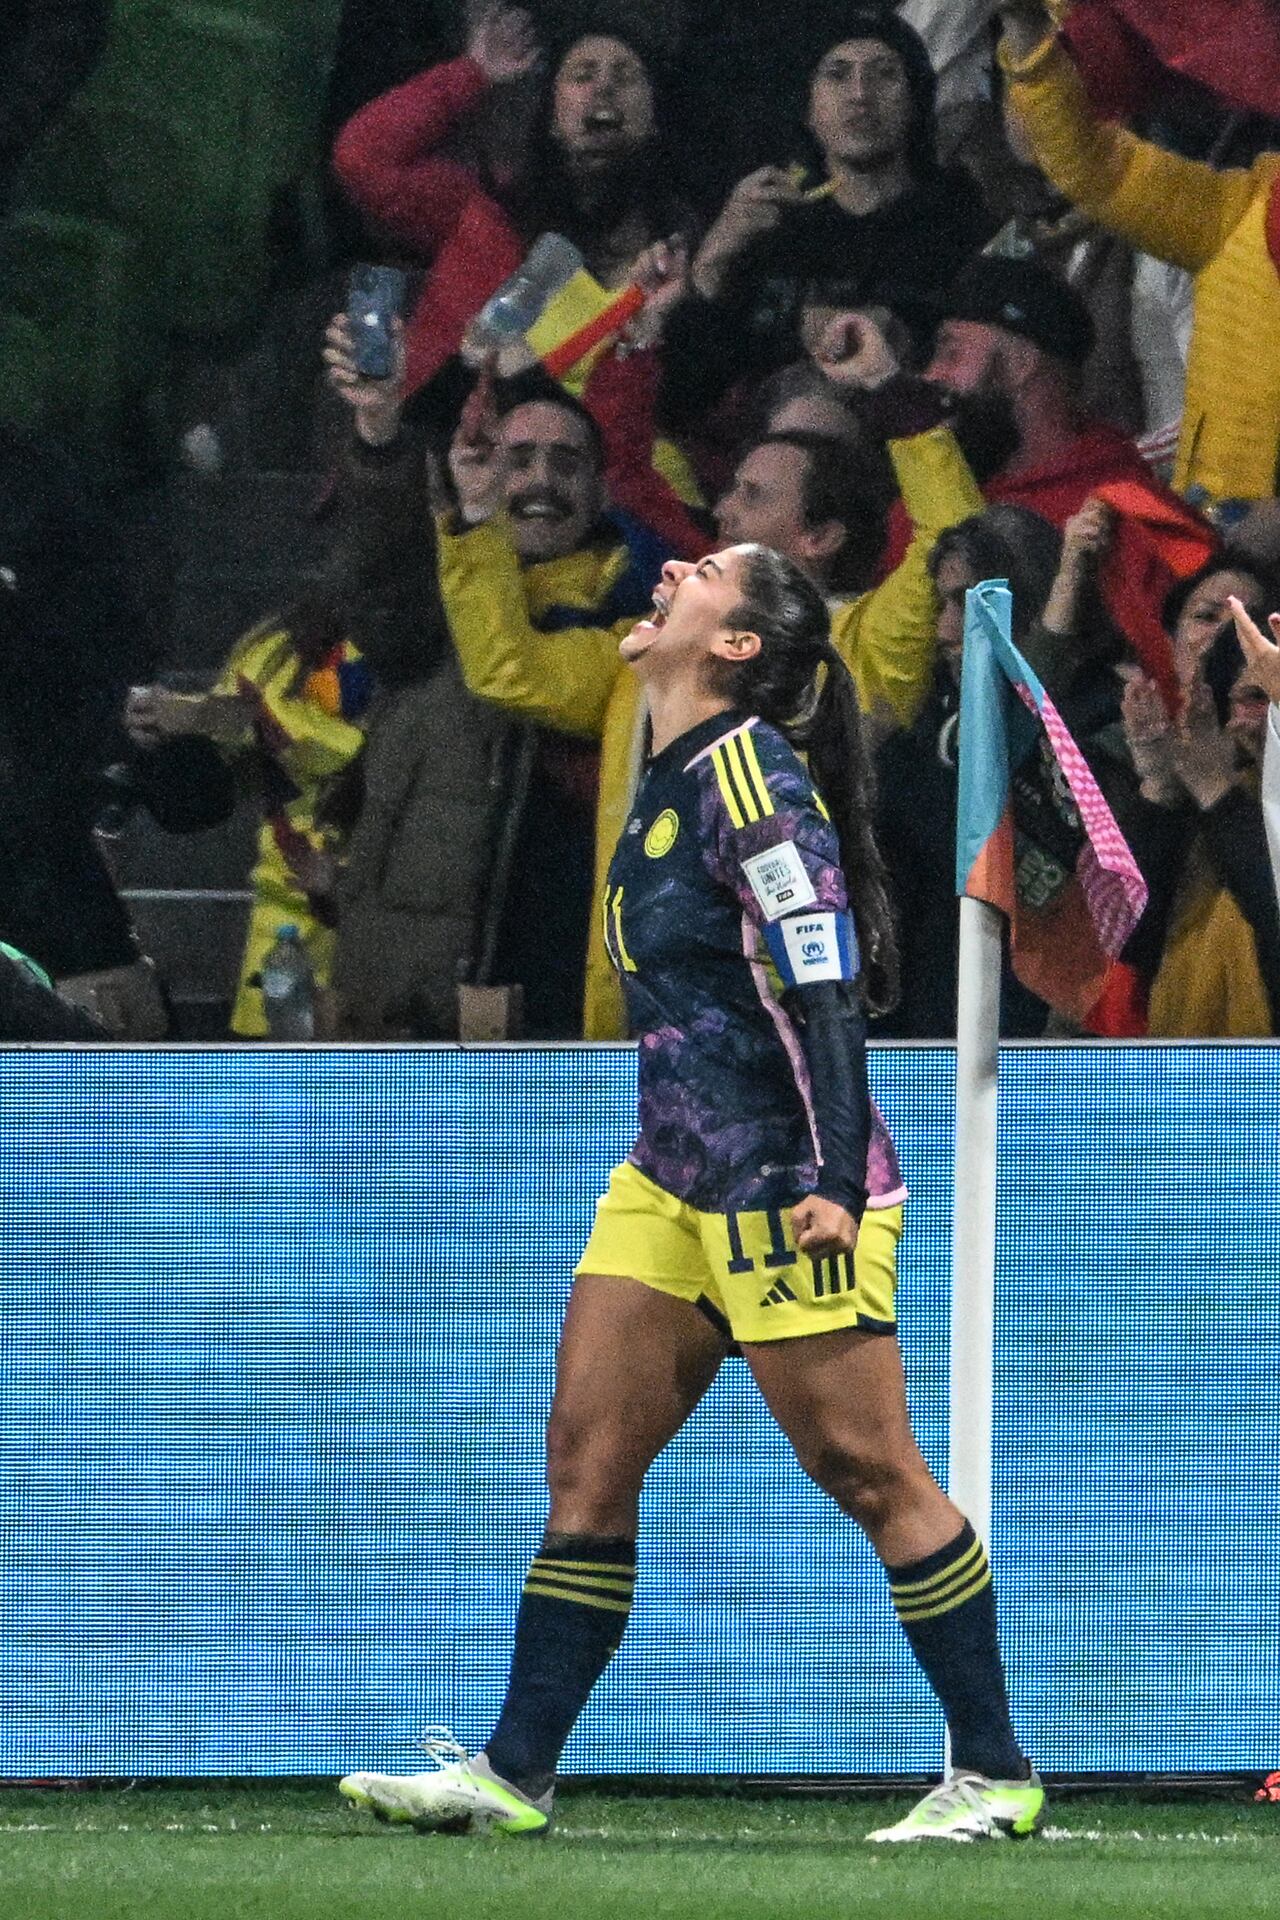 celebrates scoring her team's first goal during the Australia and New Zealand 2023 Women's World Cup round of 16 football match between Jamaica and Colombia at Melbourne Rectangular Stadium, also known as AAMI Park, in Melbourne on August 8, 2023. (Photo by WILLIAM WEST / AFP)